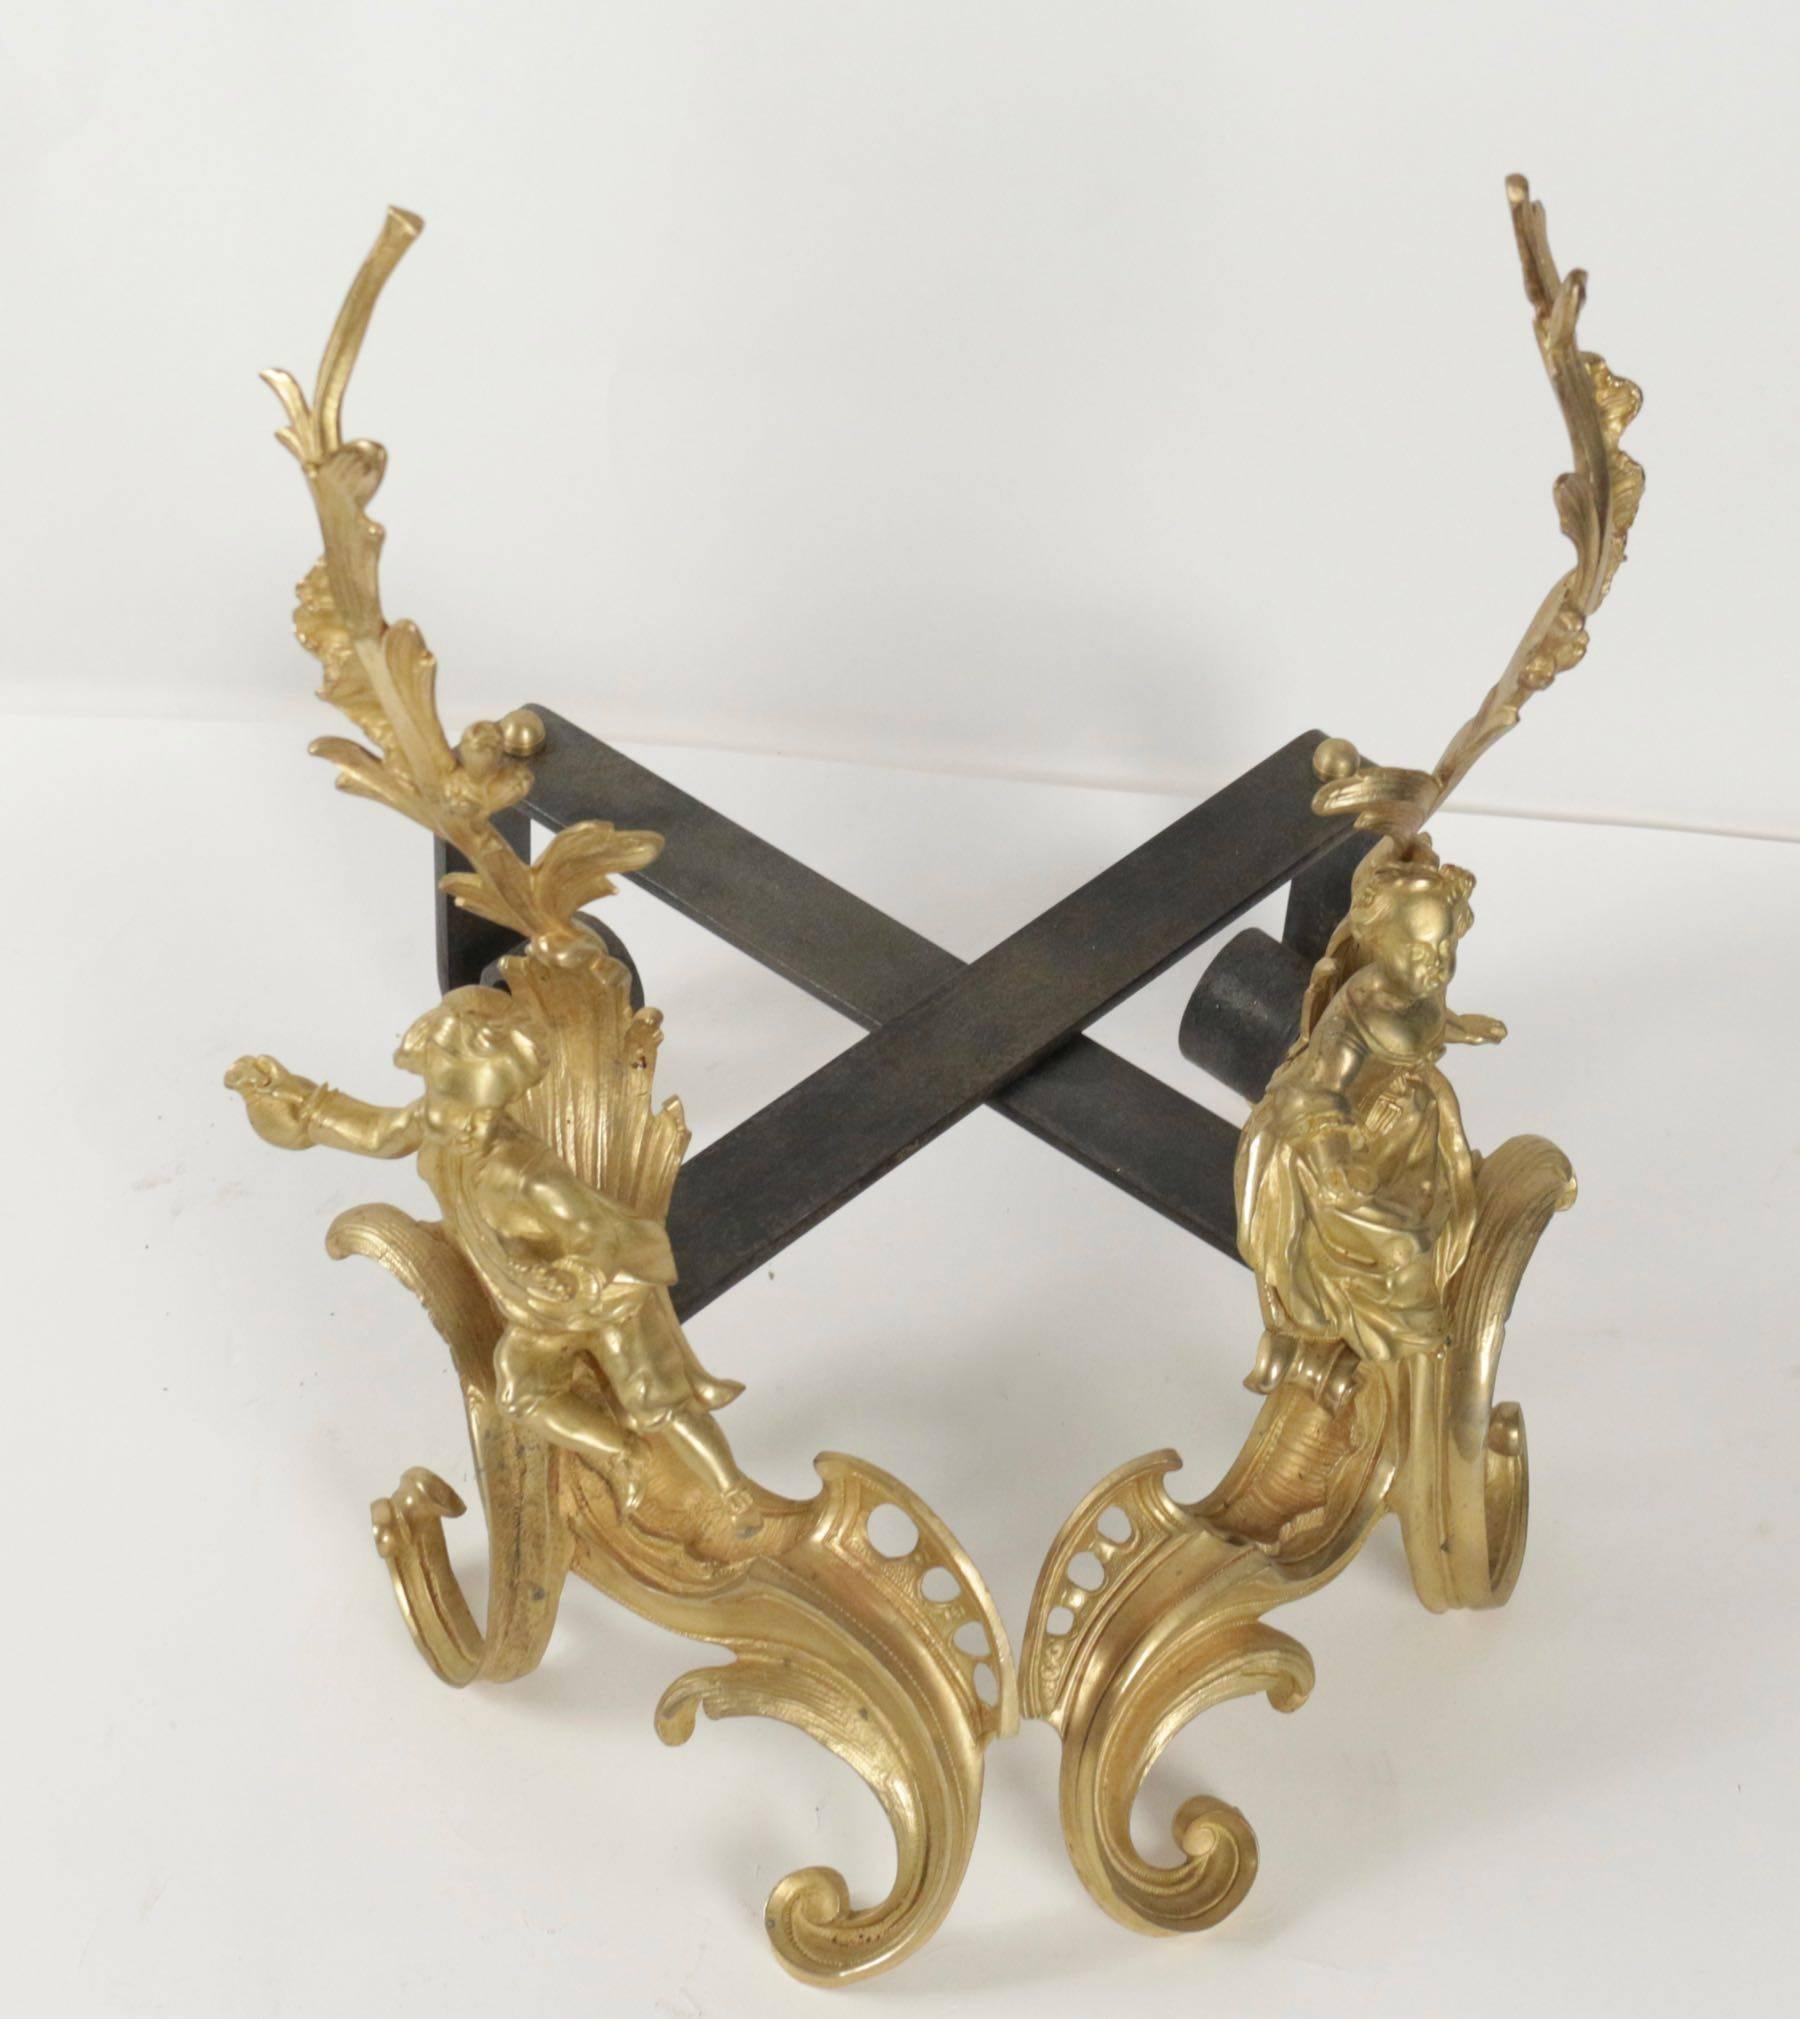 Pair of Louis XV style fireplace irons in gold gilt bronze from the 19th century representing an elegant man and woman.
 